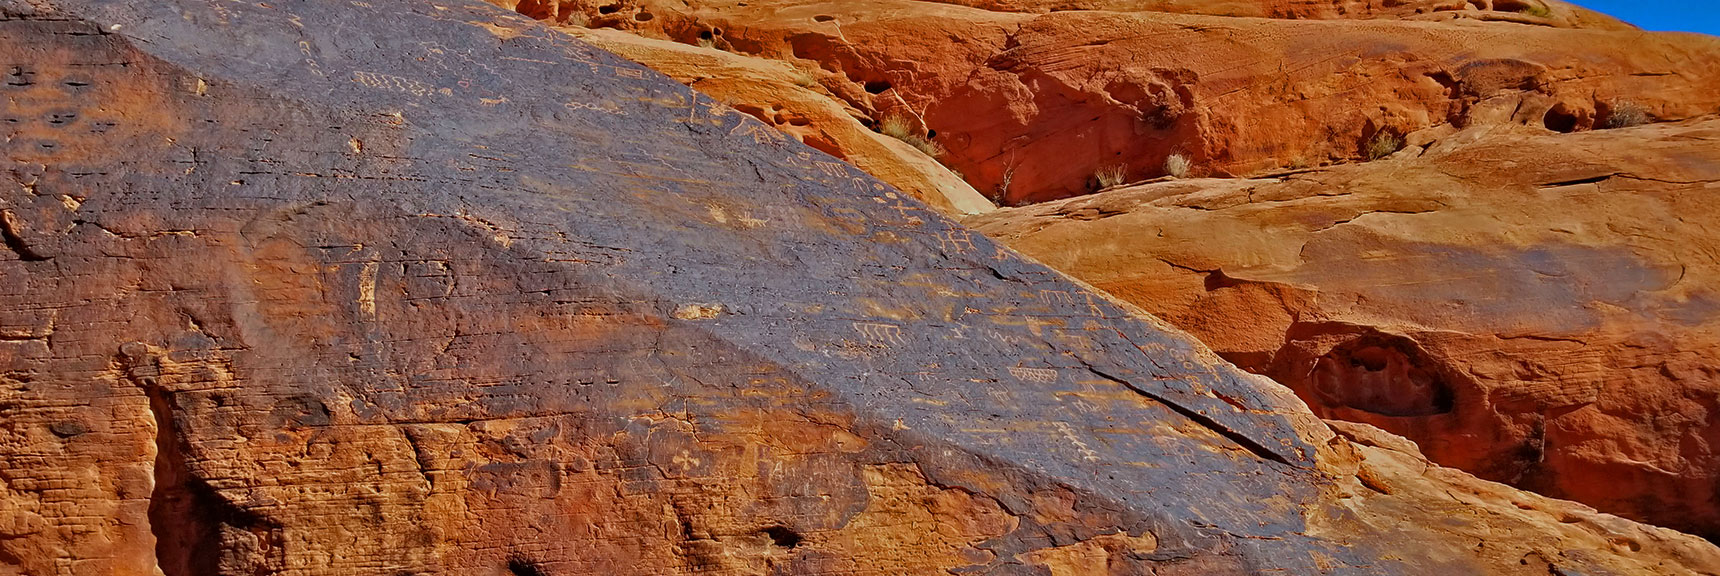 Petroglyphs on Mouse's Tank Trail in Valley of Fire State Park, Nevada, Slide 3